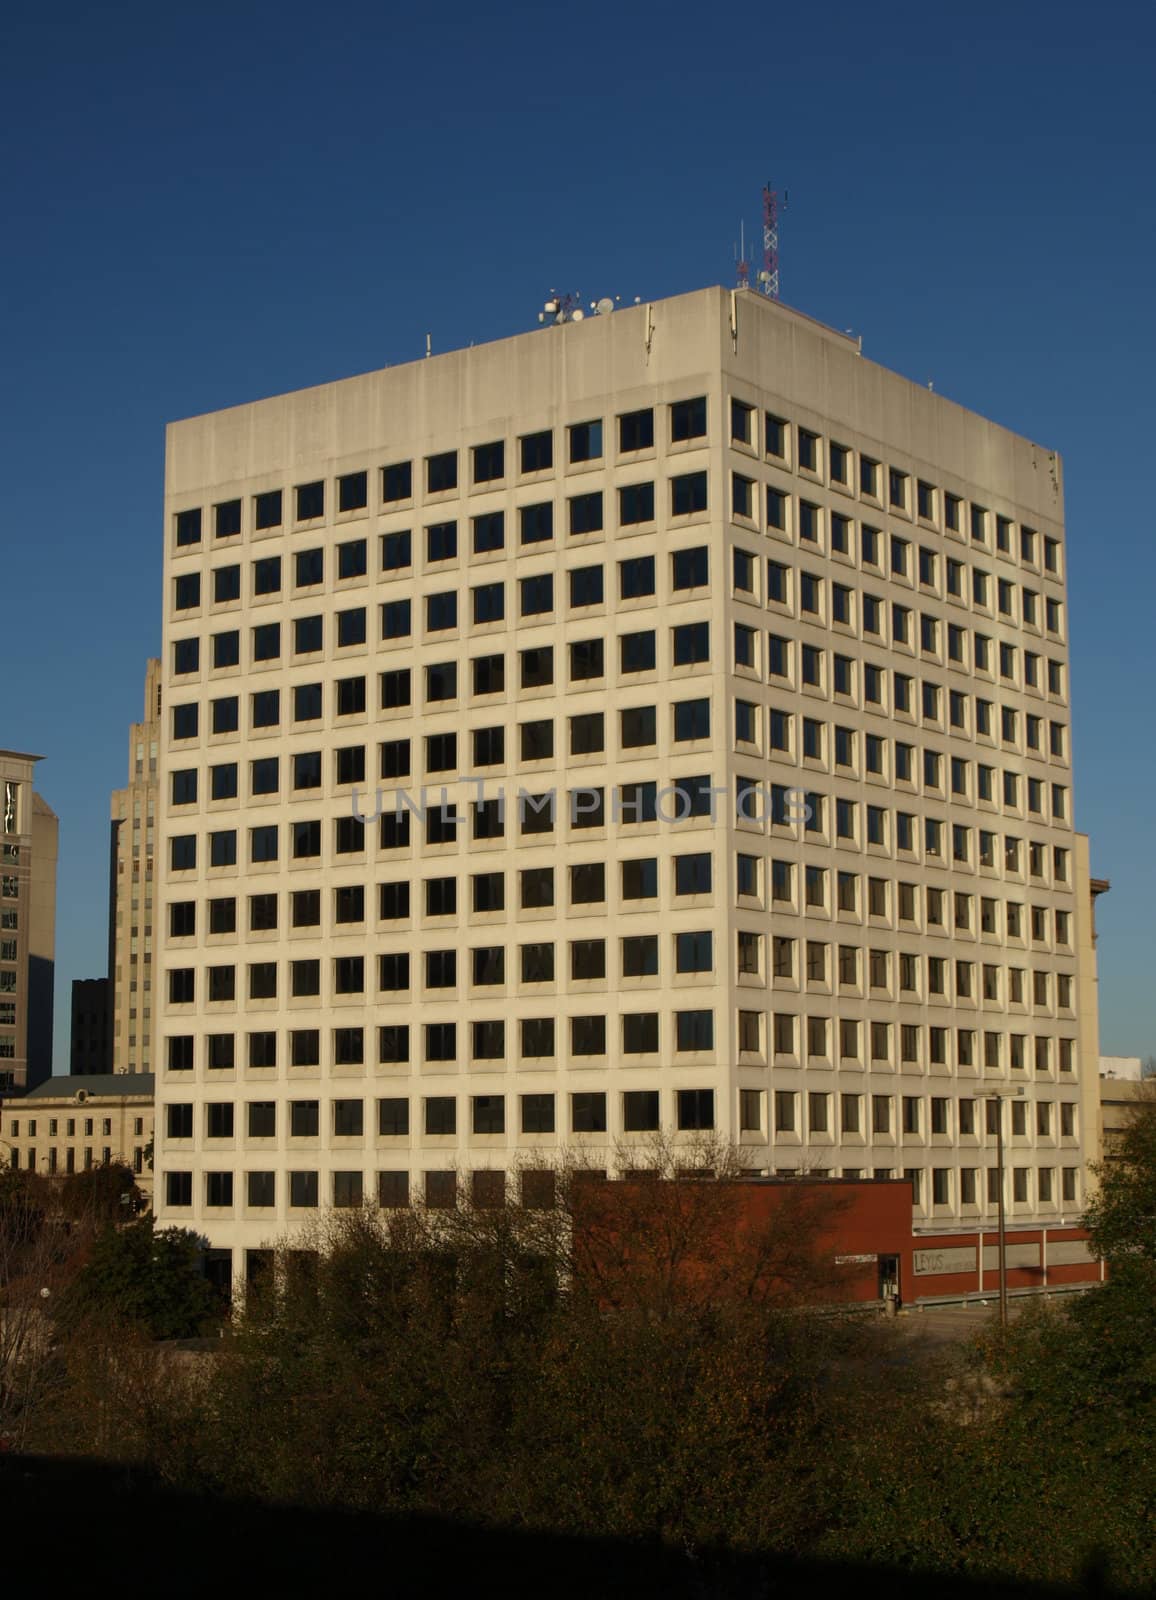 A tall square office building